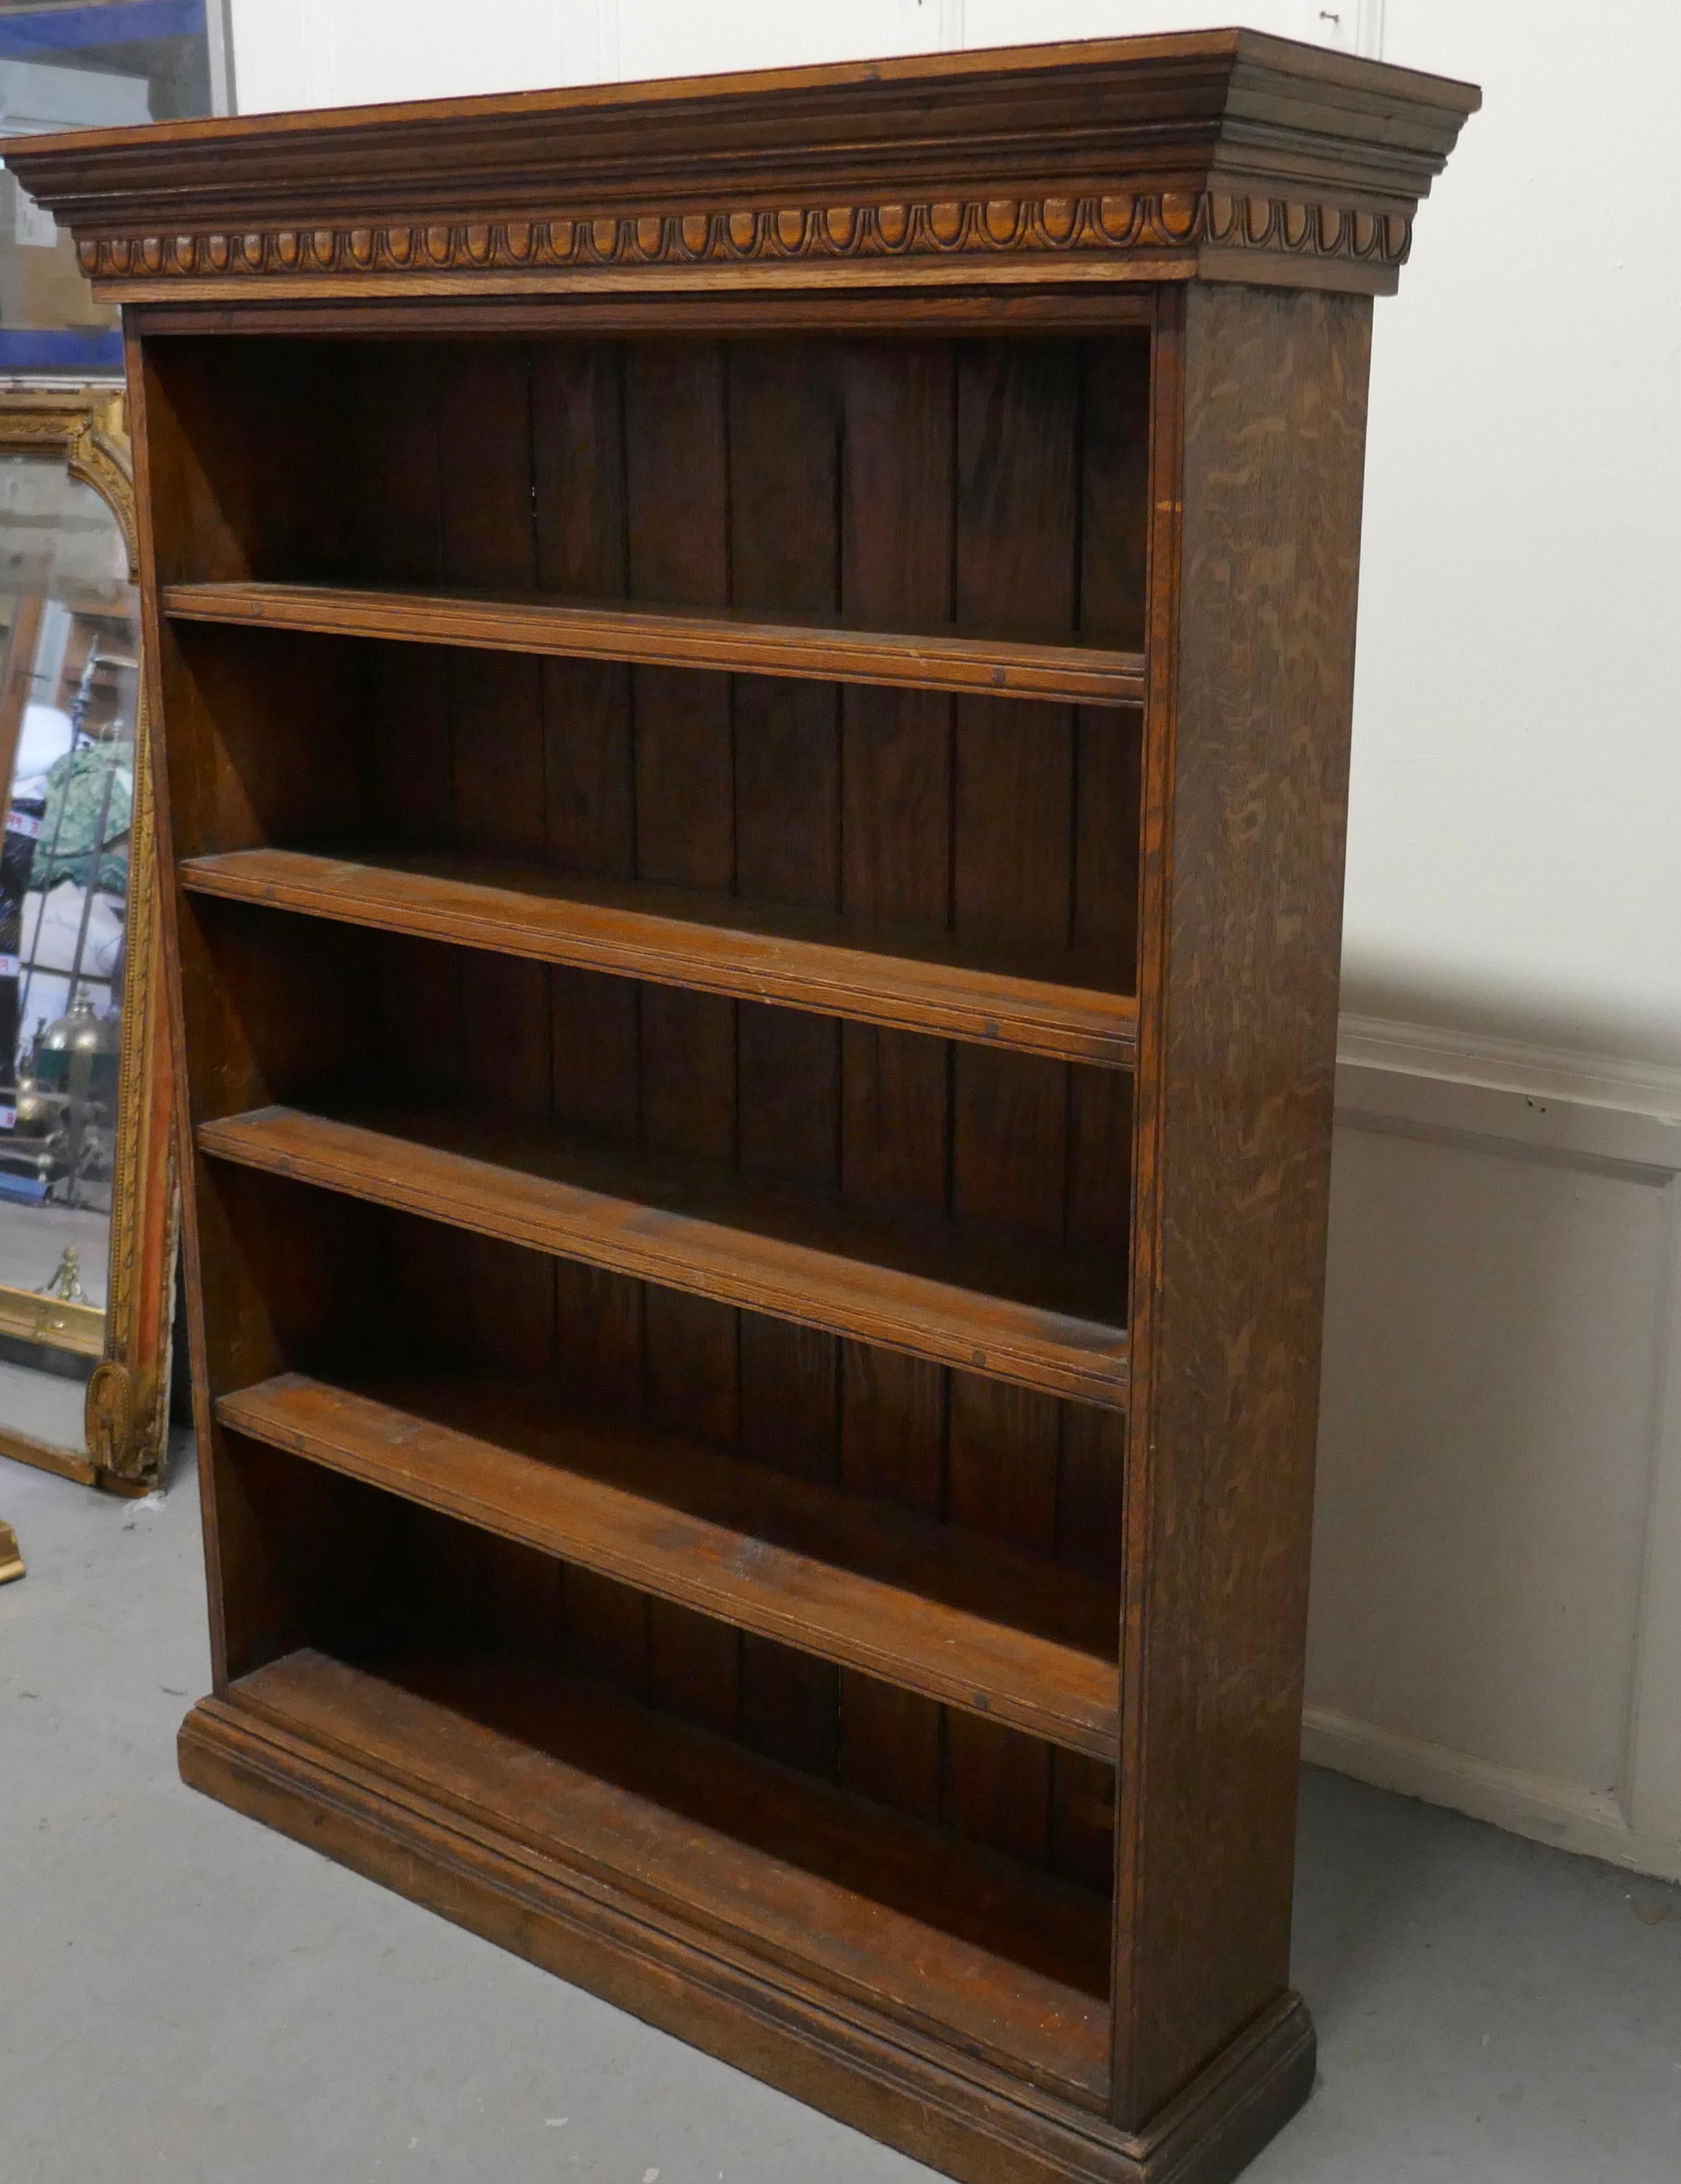 19th Century Arts and Crafts Open Oak Bookcase with Secret Compartment